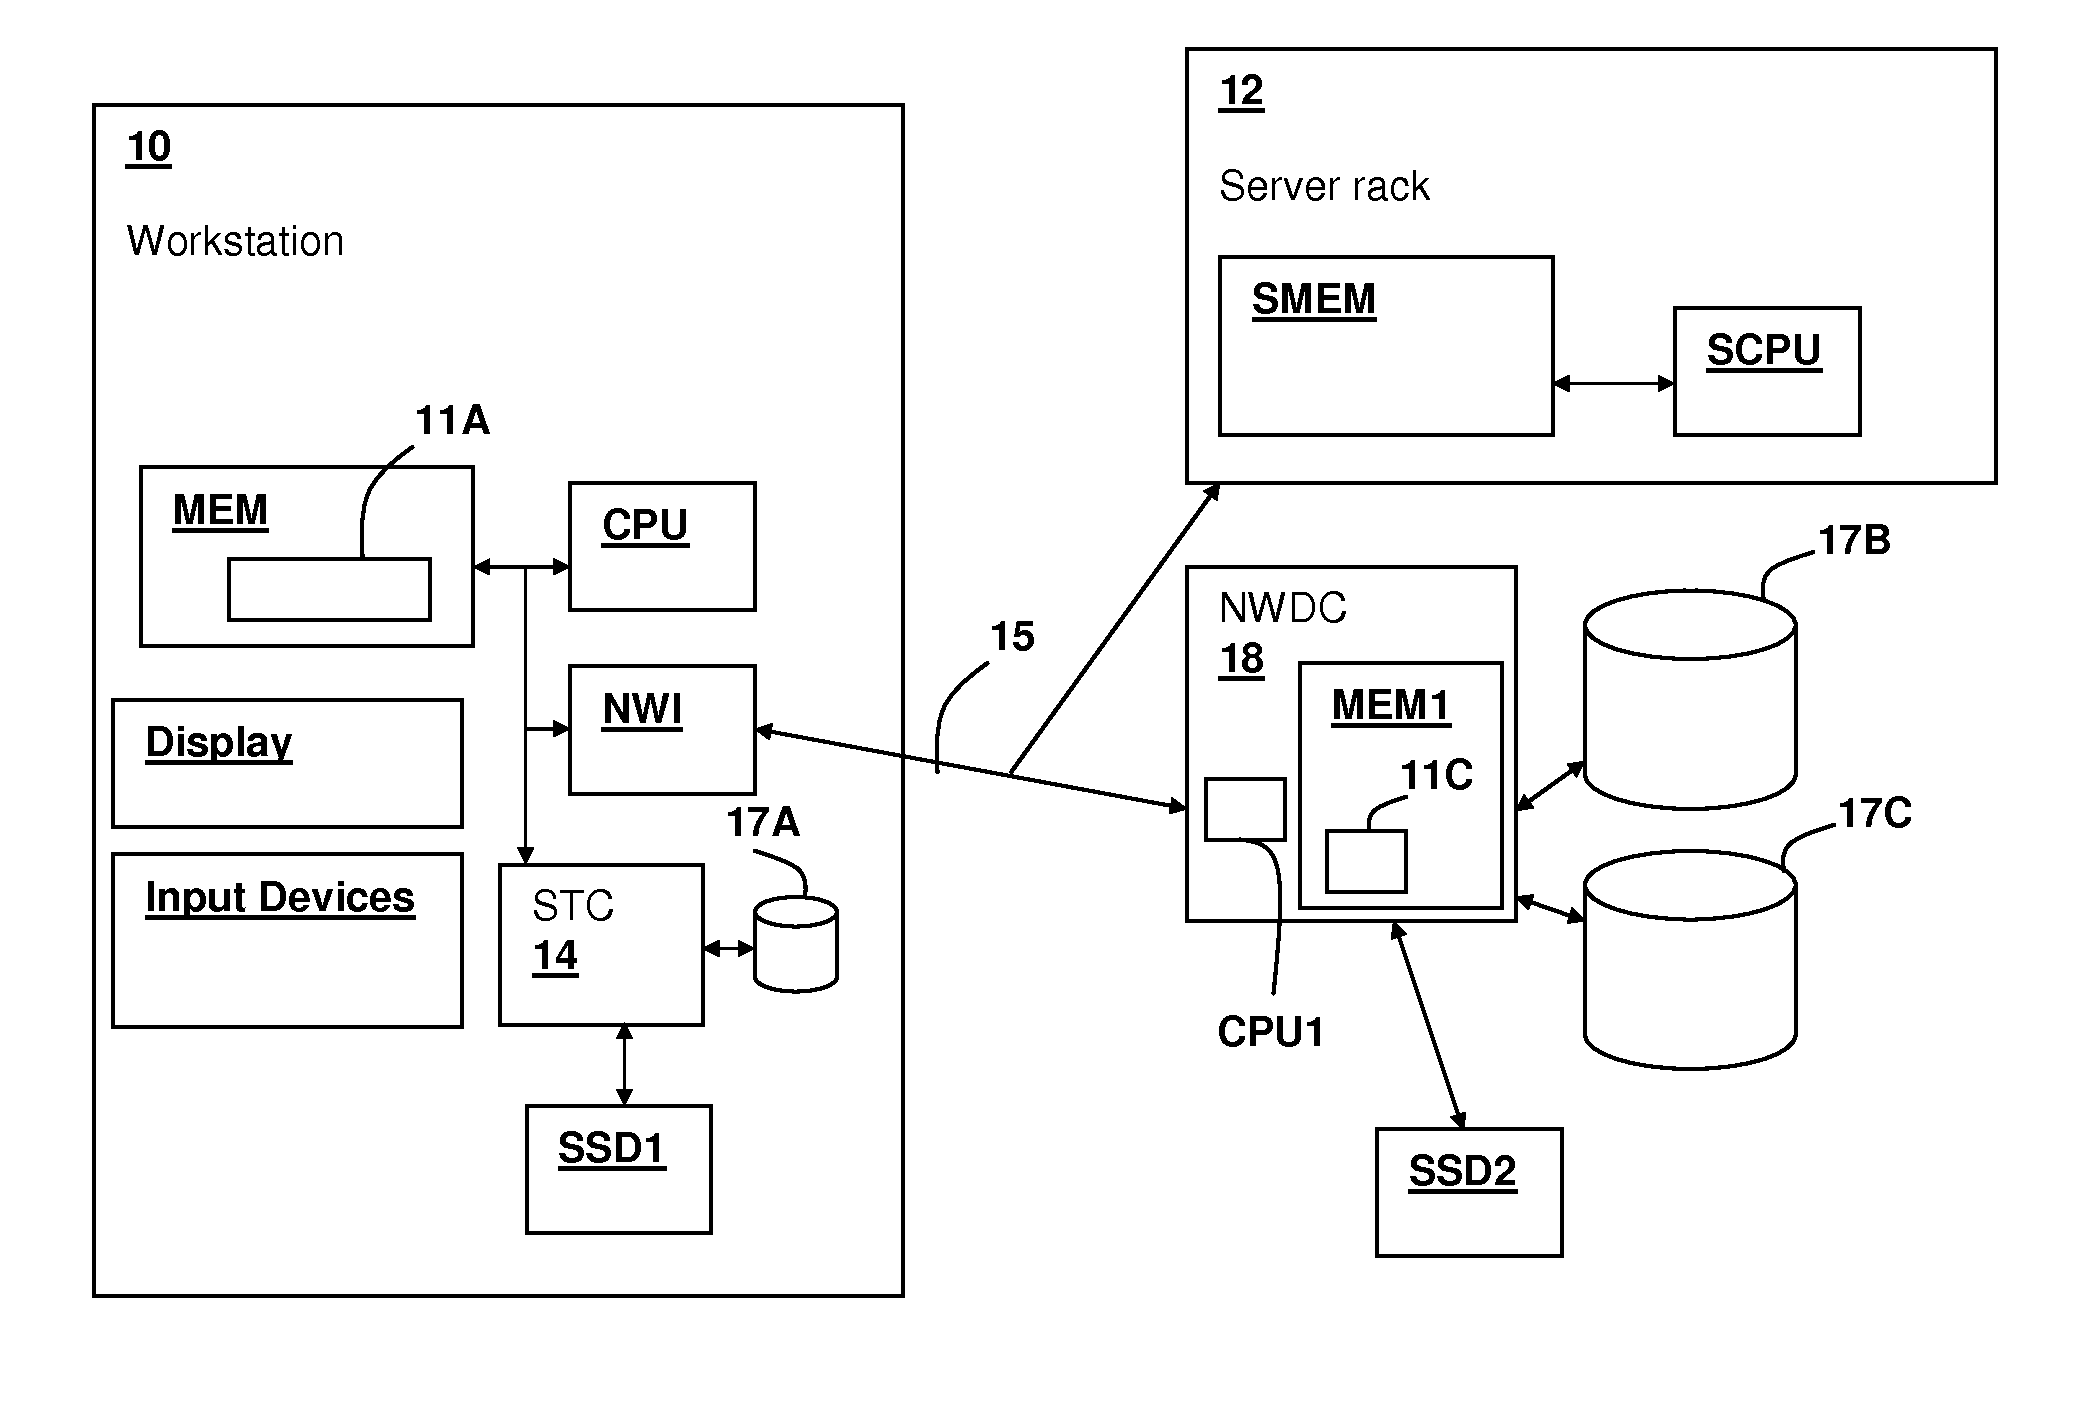 Hybrid storage subsystem with mixed placement of file contents